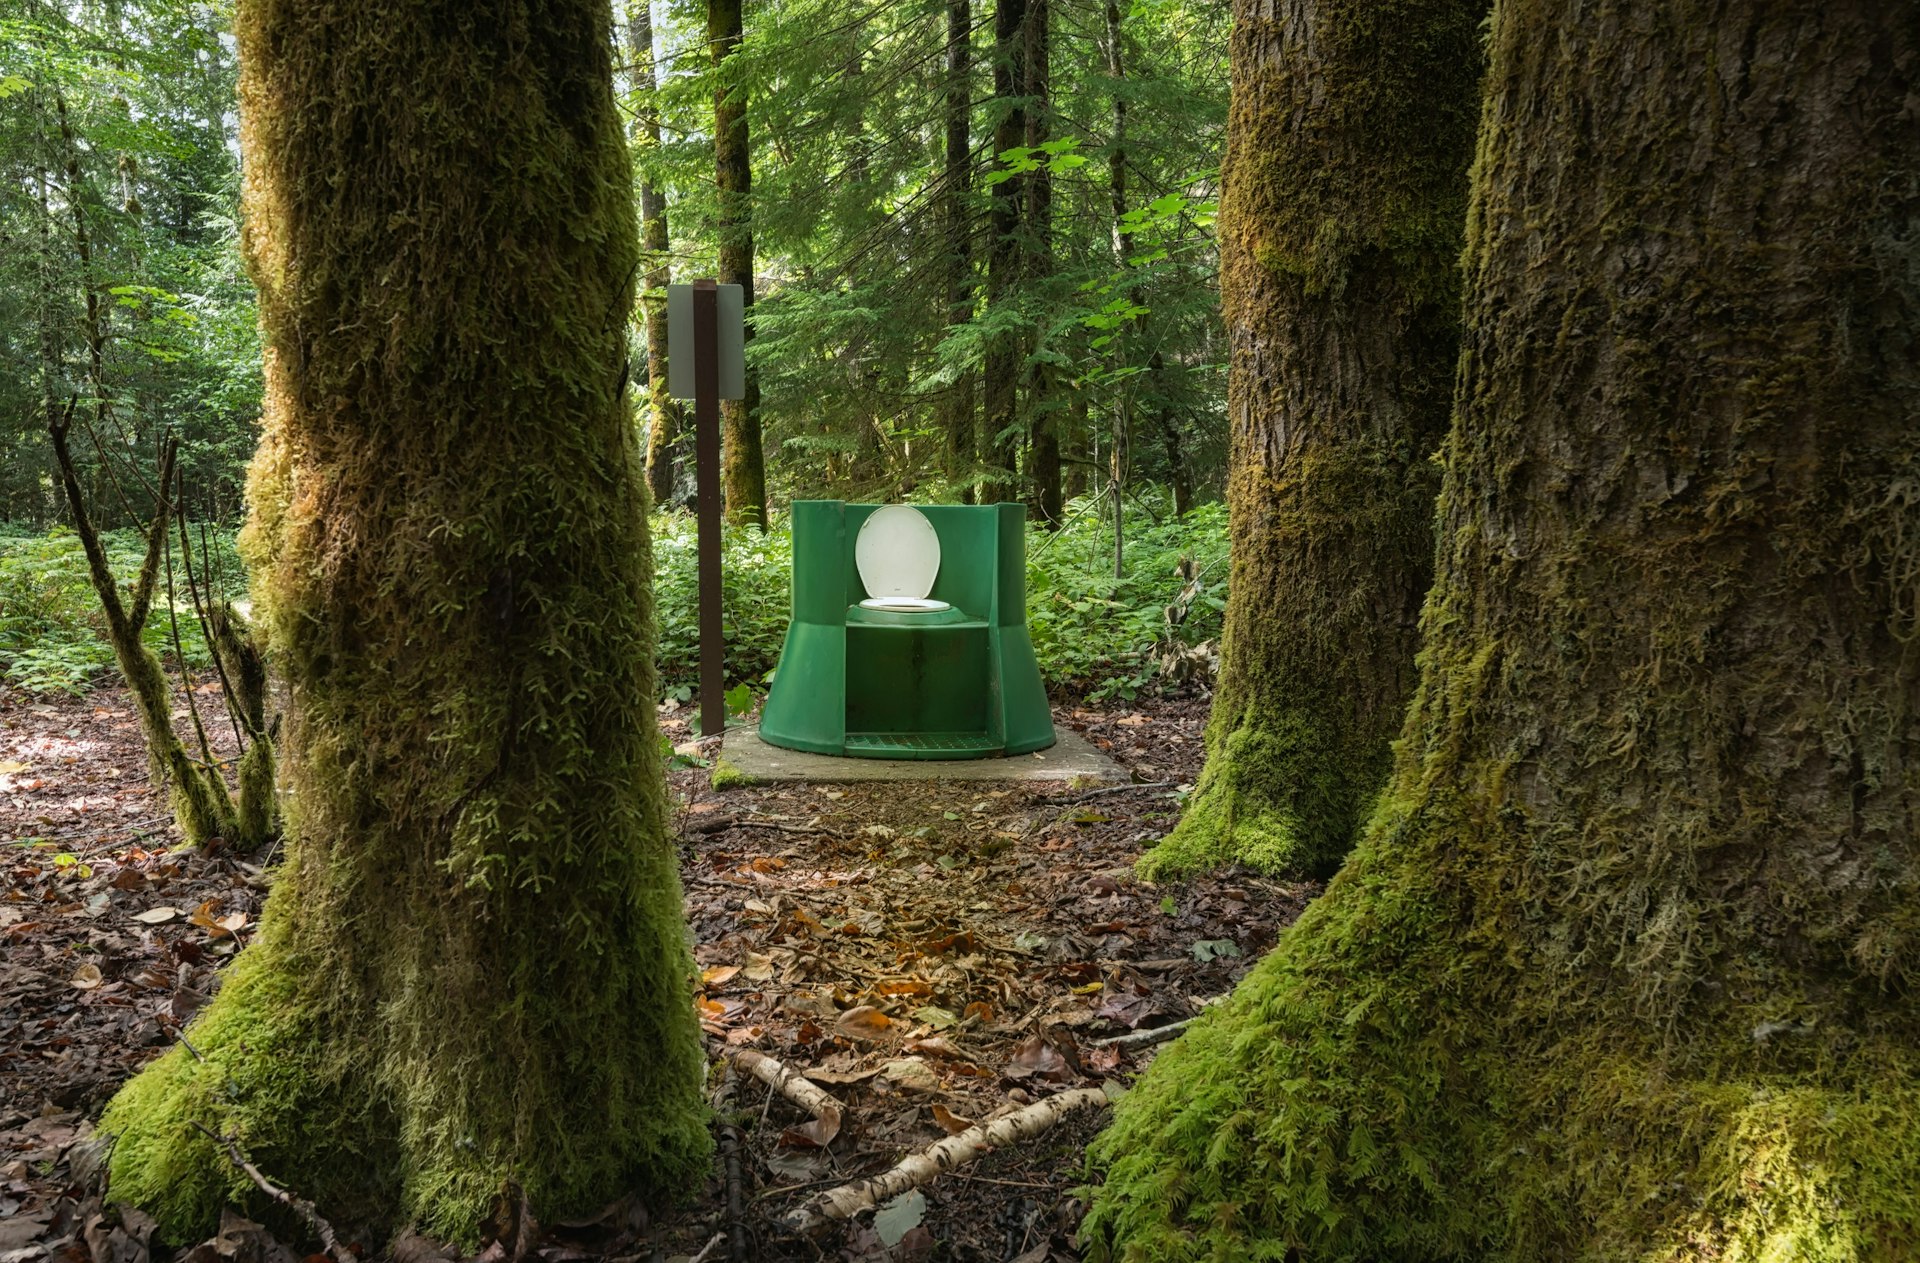 A toilet in the middle of a dense rainforest in British Columbia, Canada; there are no walls, just a white seat on a green platform surrounded by trees.